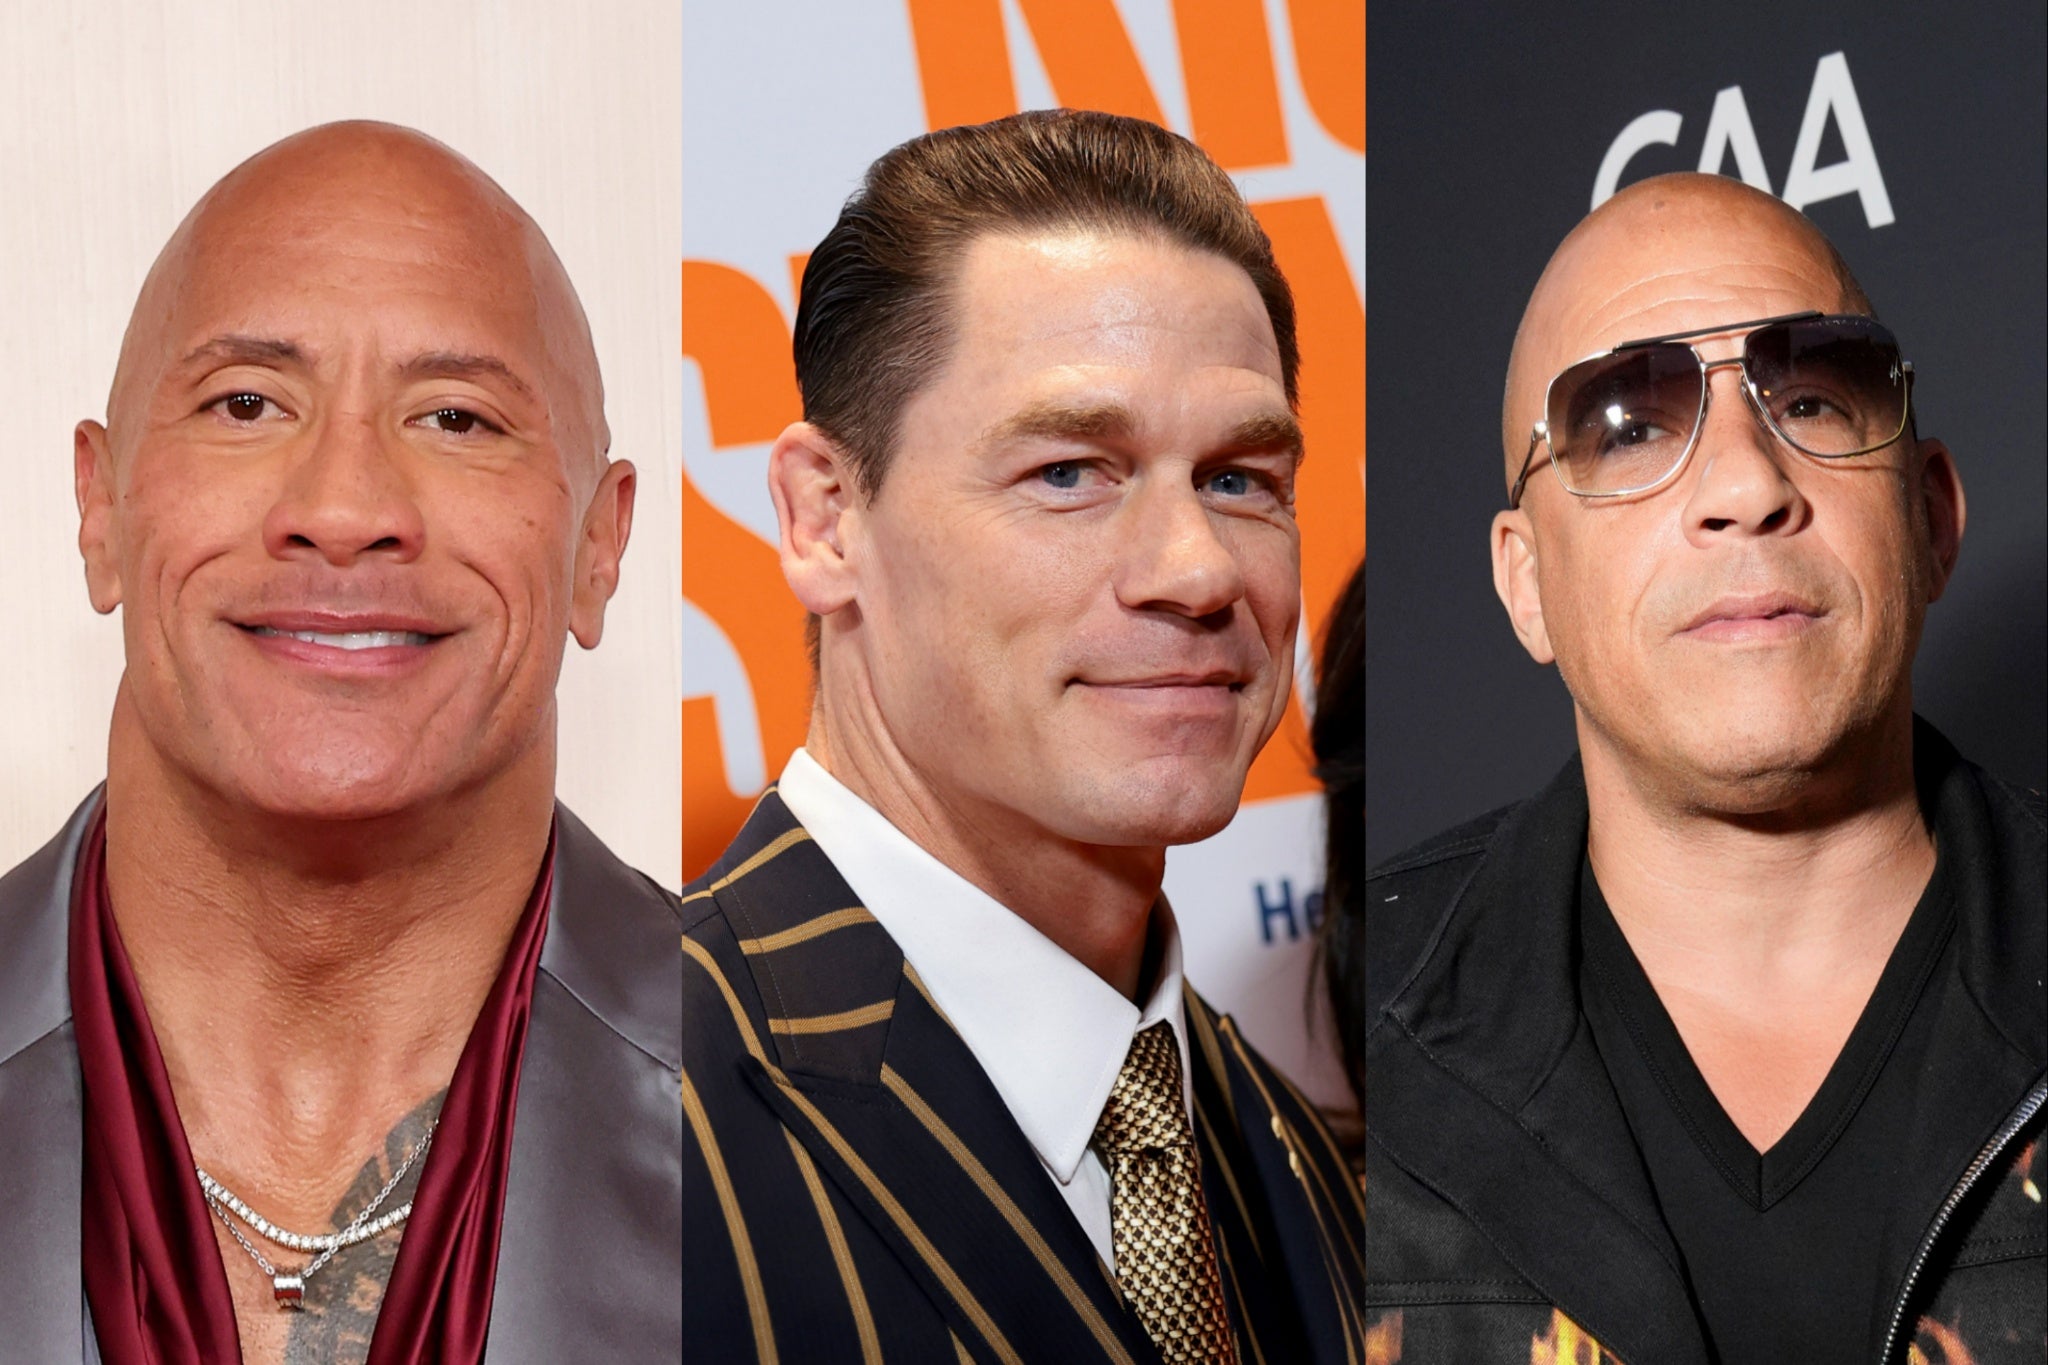 Dwayne Johnson, John Cena and Vin Diesel have all featured in the Fast movies